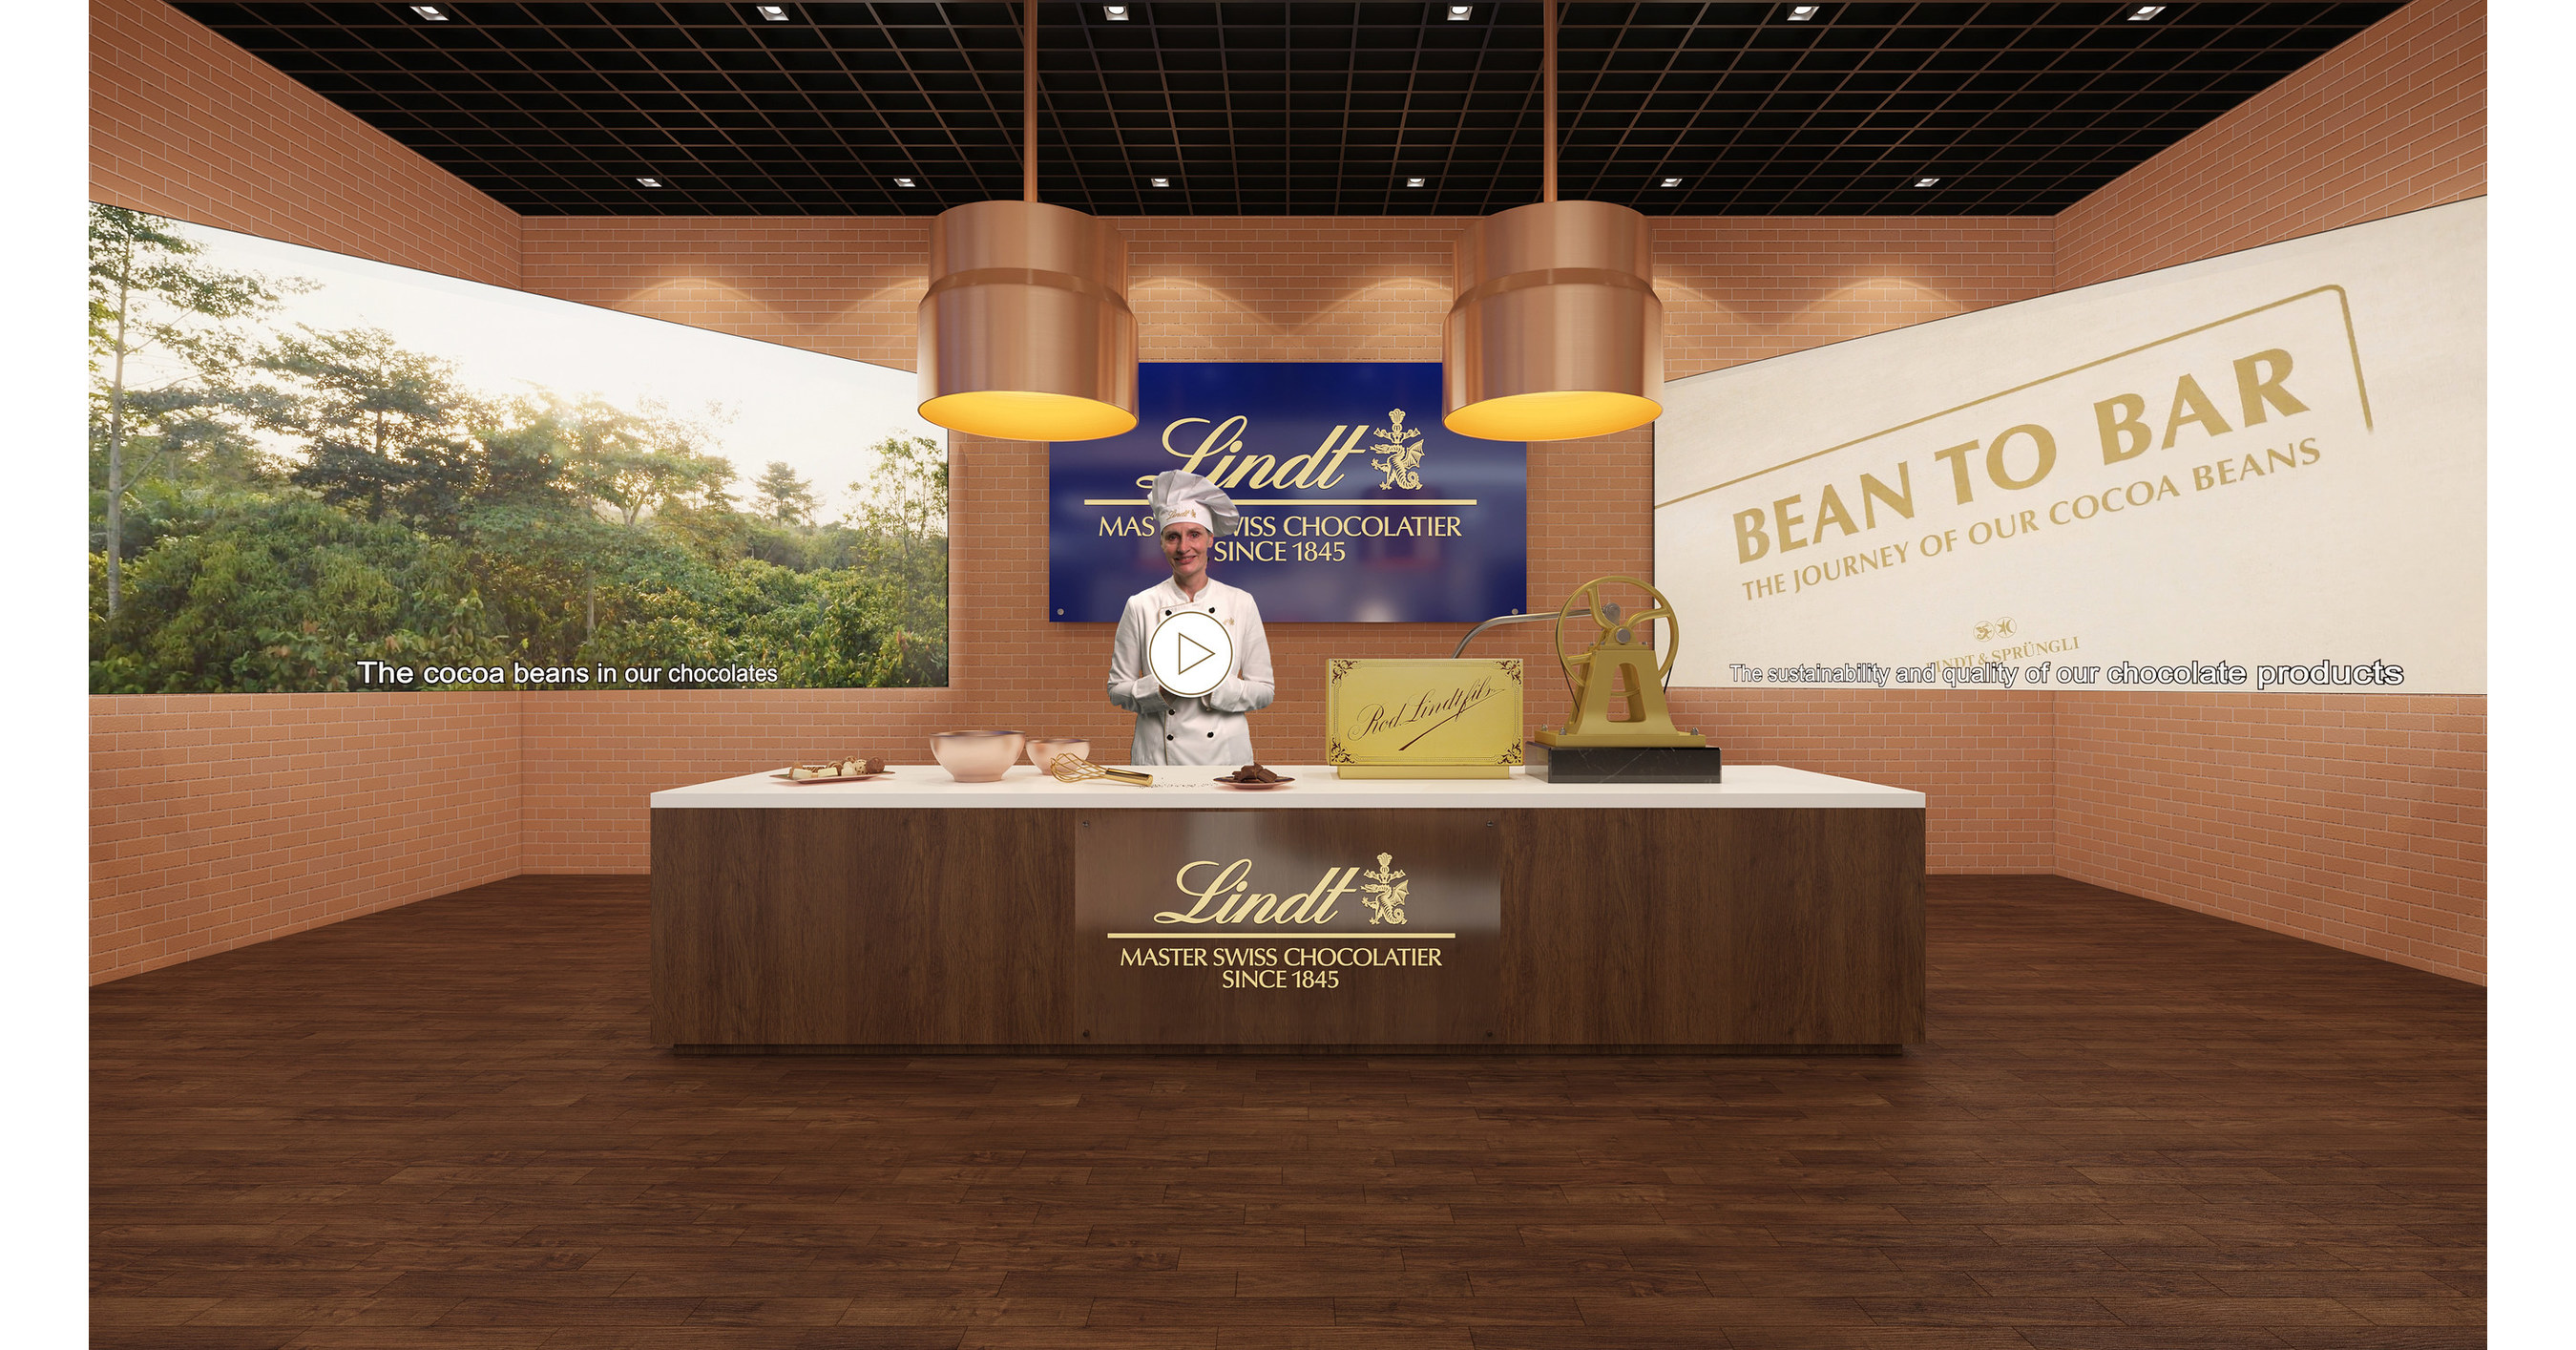 Lindt launches Lindor chocolate stick PMPs - Better Retailing